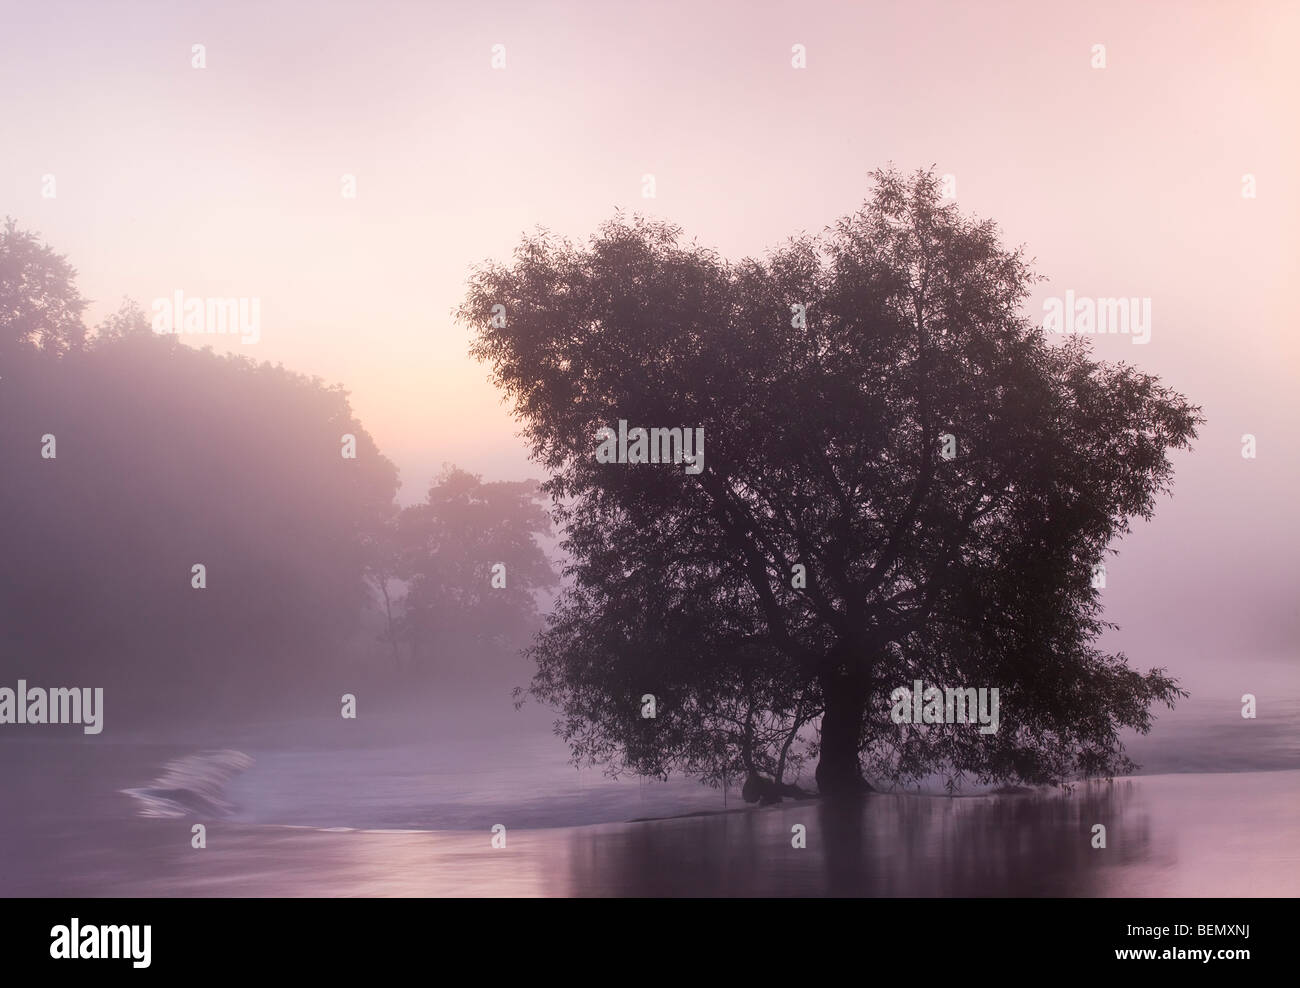 One tree pictured amongst the mist at dawn on the River Boyne - County Meath Ireland Stock Photo